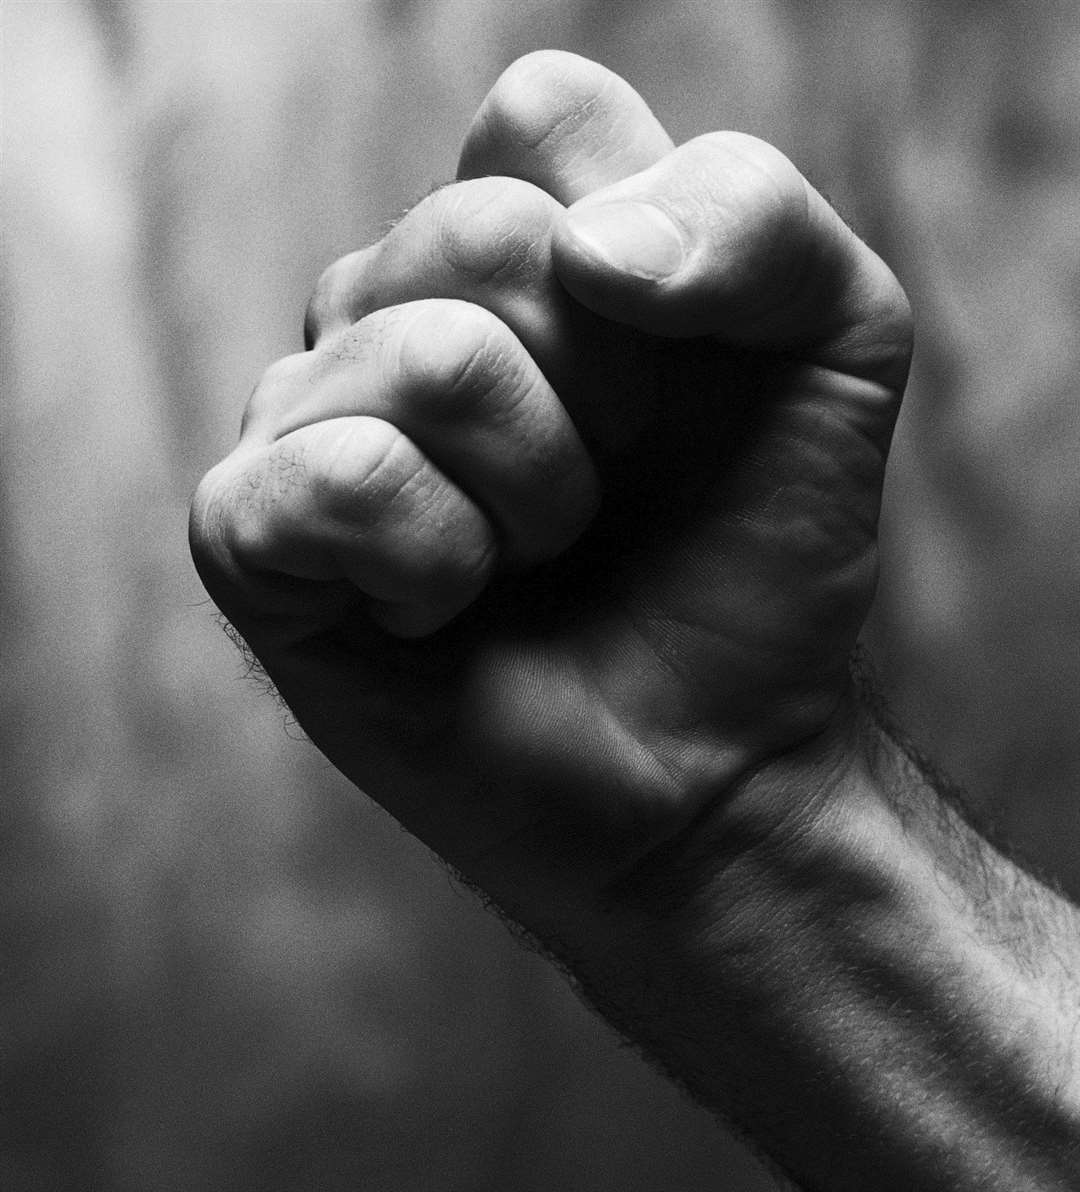 Lewis Jacobs punched a wall as he was taken down to the cells. Picture: Thinkstock Image